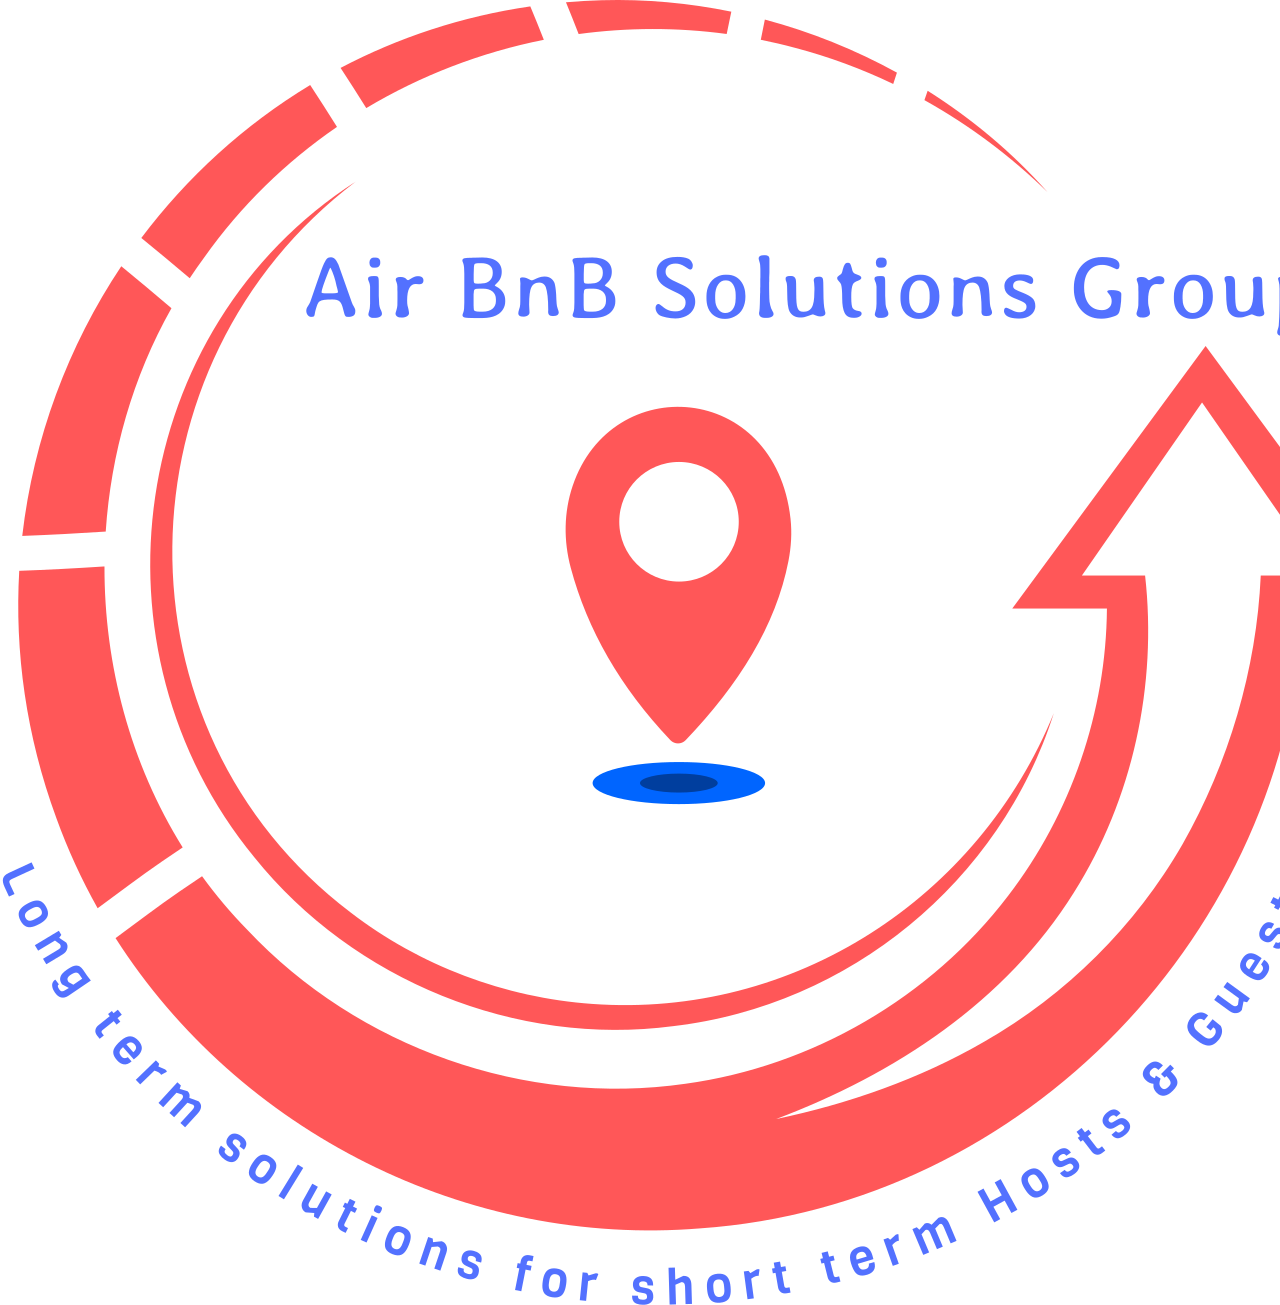 Air BnB Solutions Group's logo